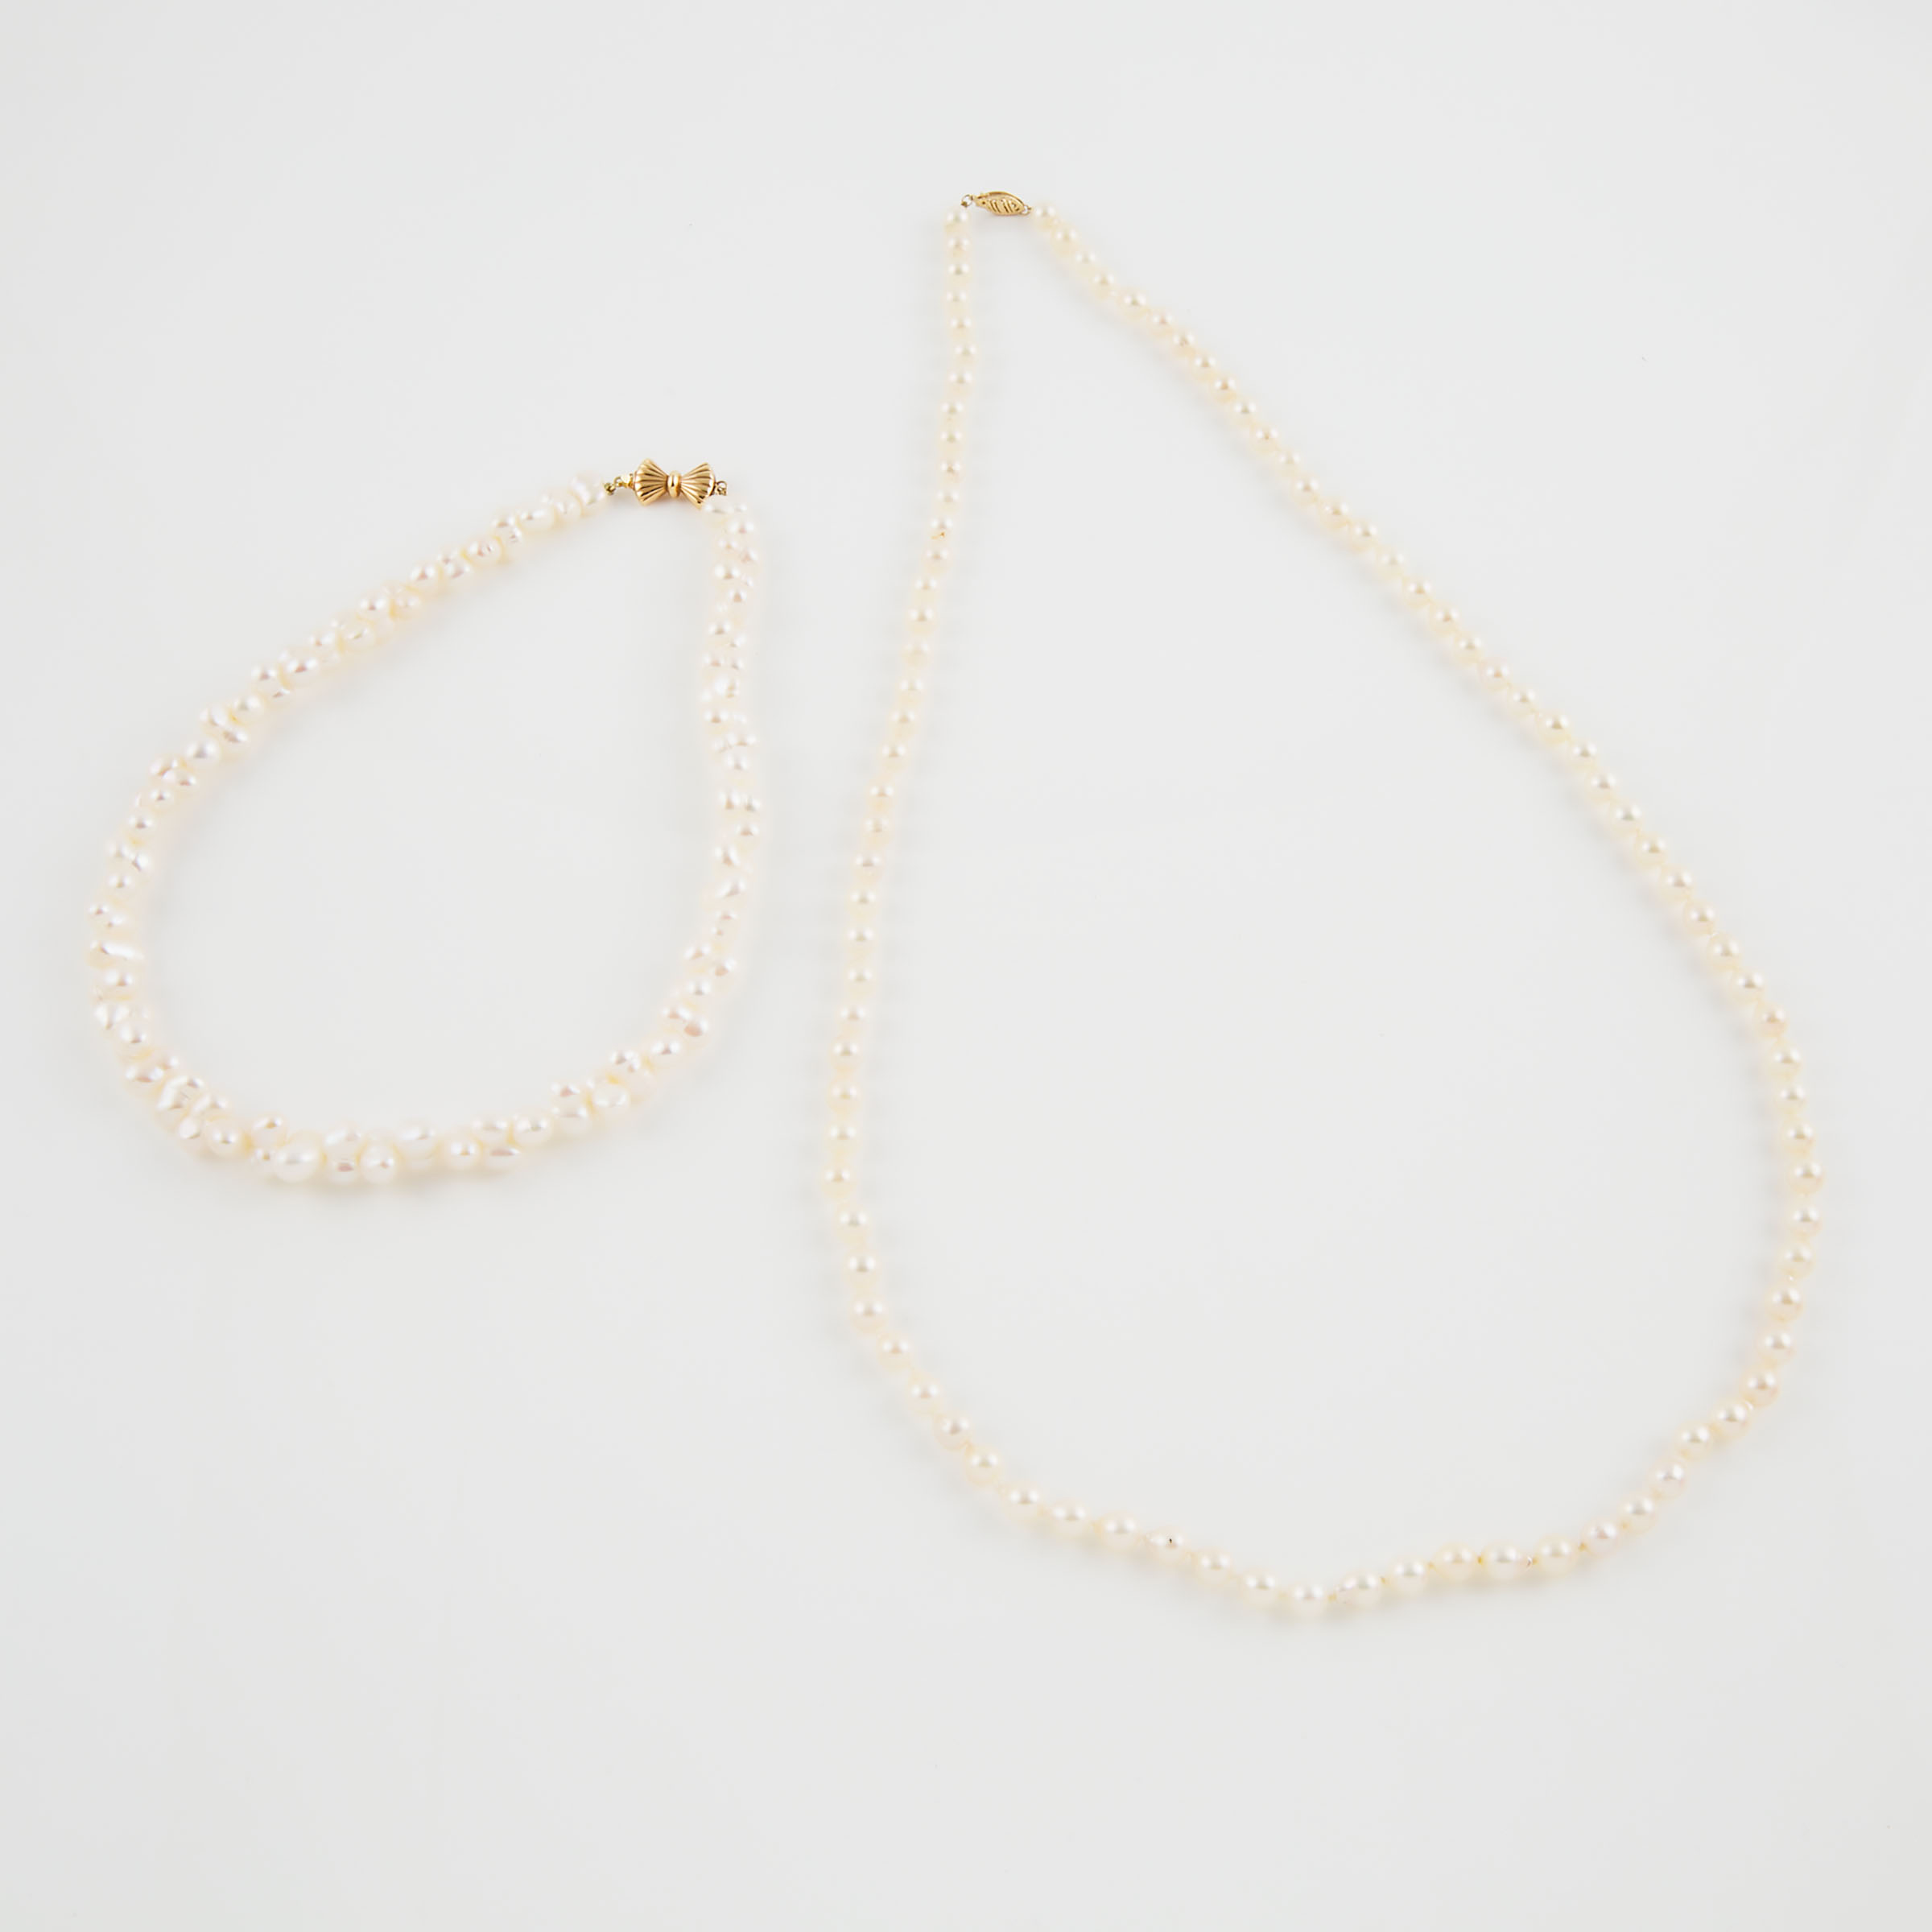 Two Single Strands Of Pearls